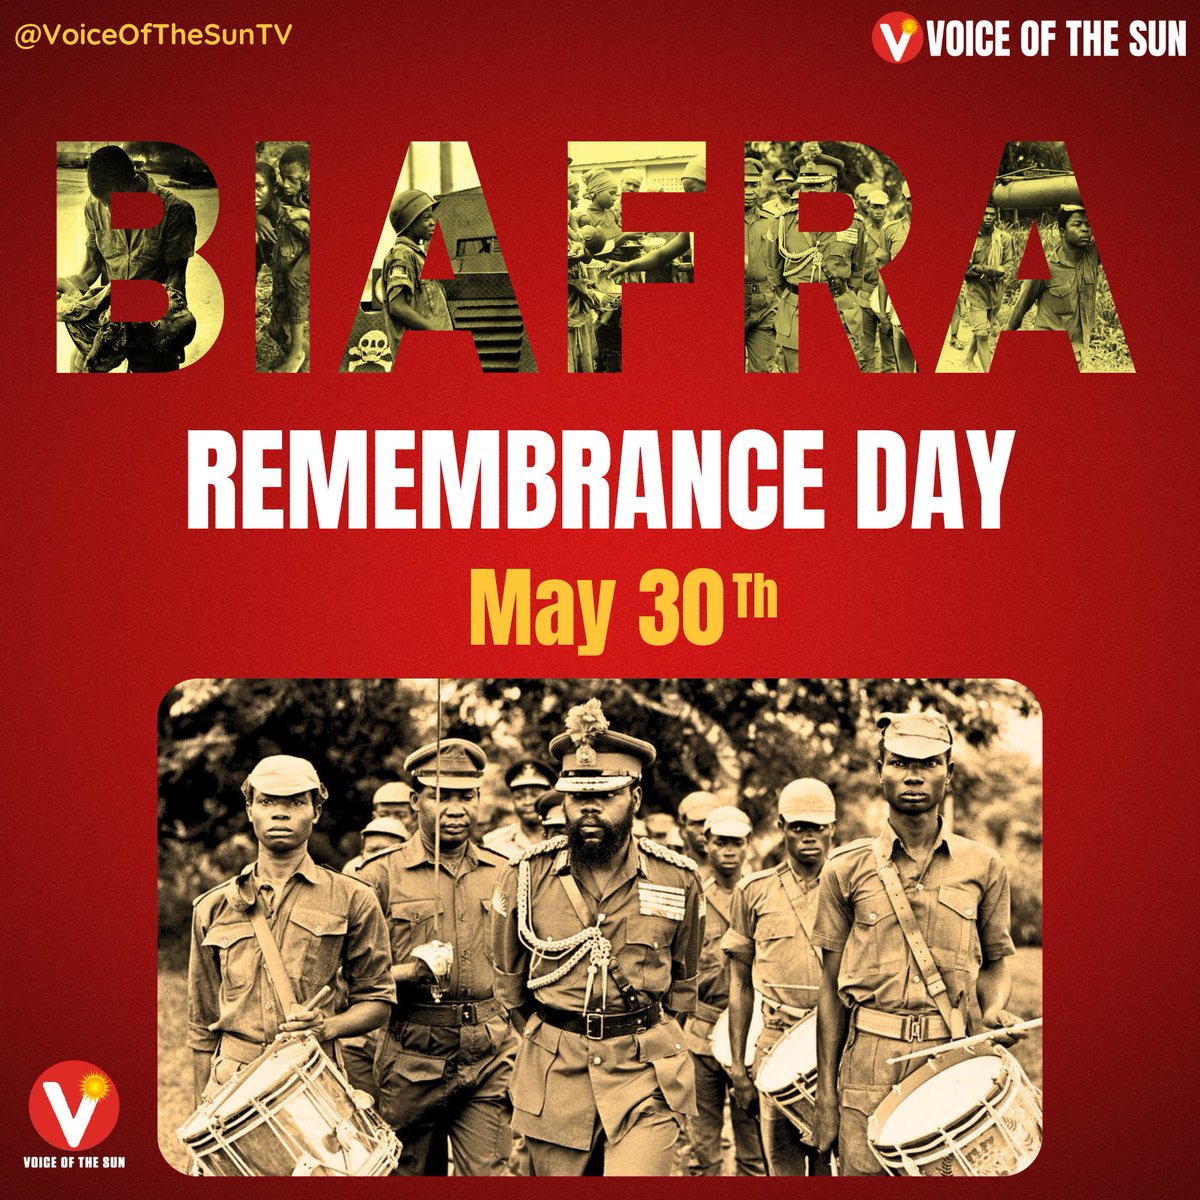 Today is the 30th of May, the Biafra Remembrance Day, we remember those who fought bravely to defend our people for three years during the genocide, now called Biafran War. We remember the children that were starved to death. *A Thread*